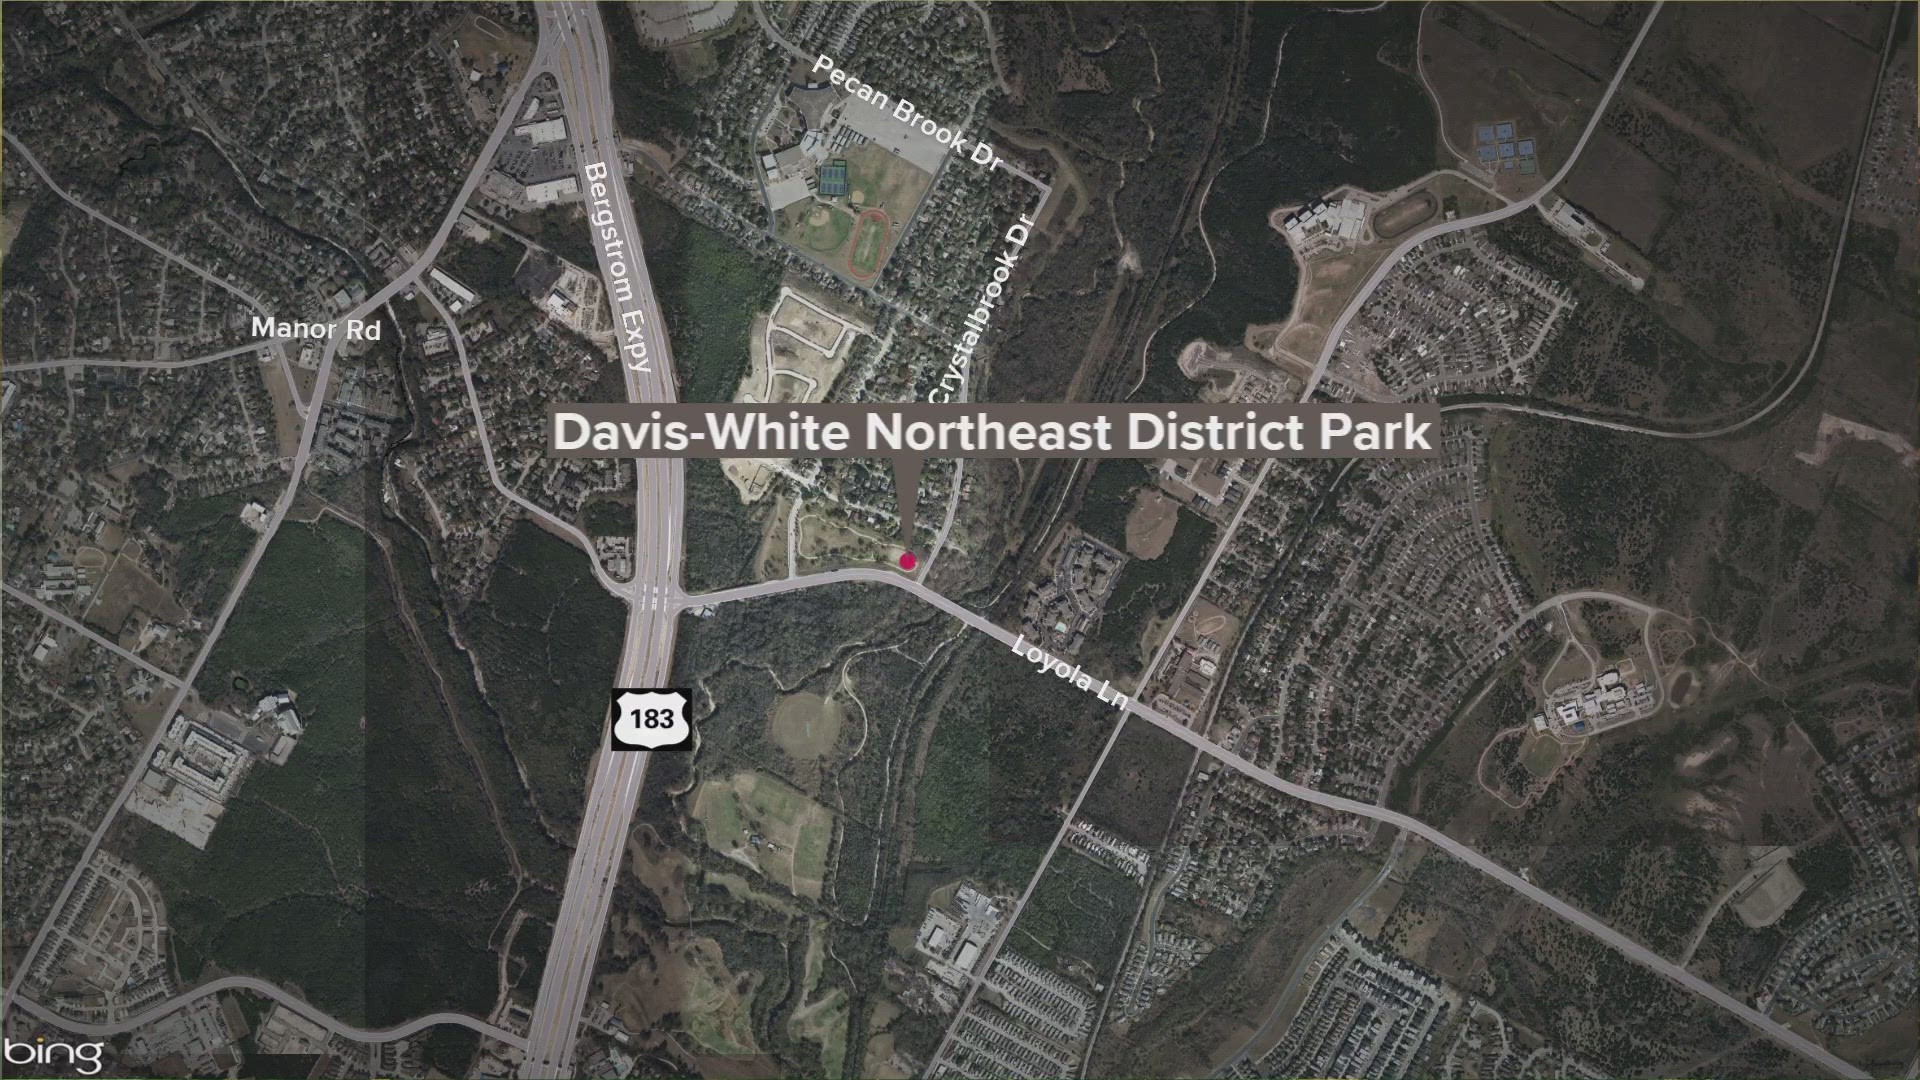 New lights are now brightening a half-mile walking trail in the Davis-White Northeast District Park.